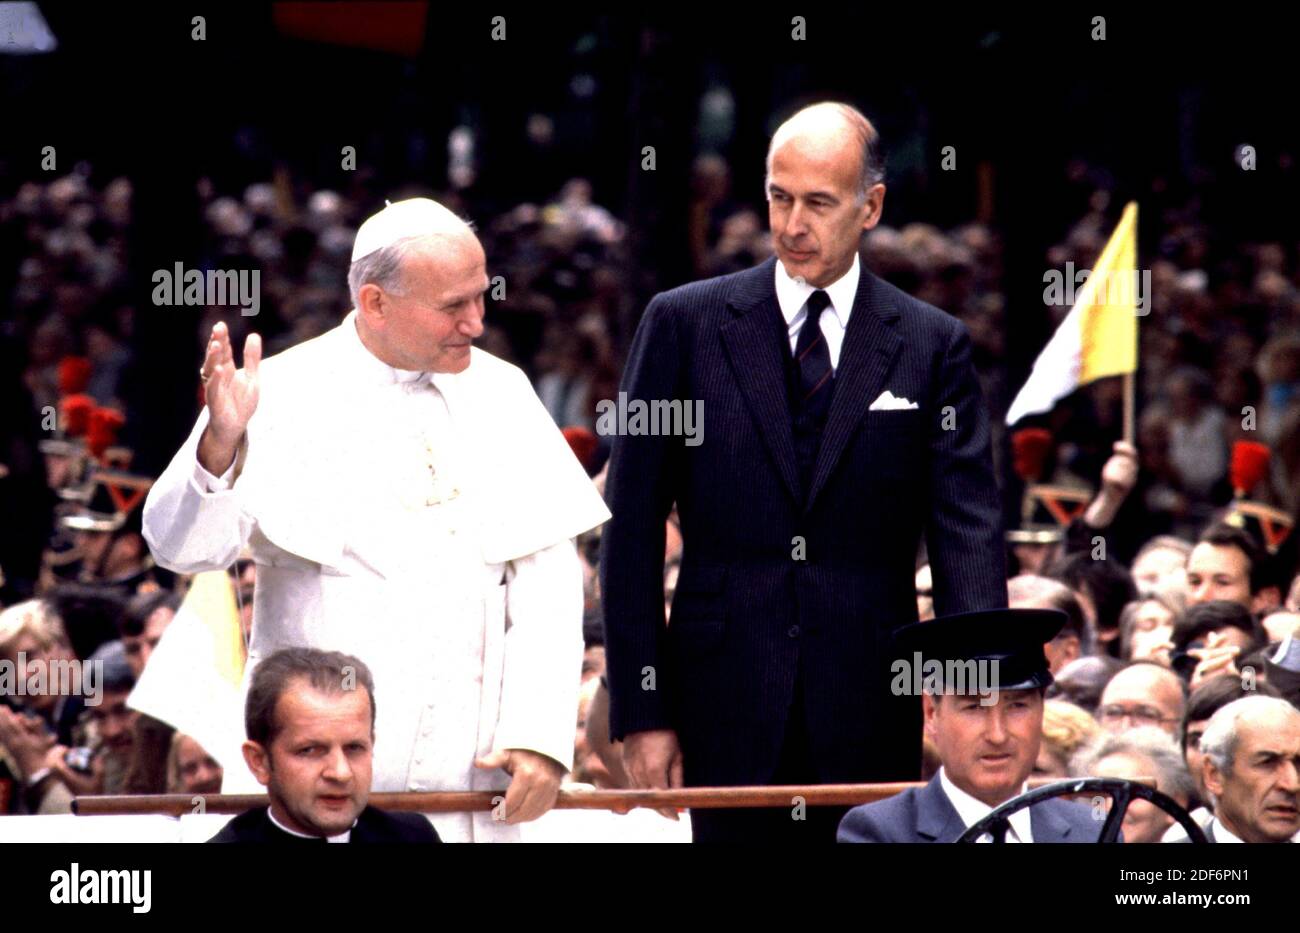 May 30, 1980: Jean Paul II and Valéry Marie René Georges Giscard, President of the Republic, walking down the Champs Elysee, Paris (75), France. Stock Photo